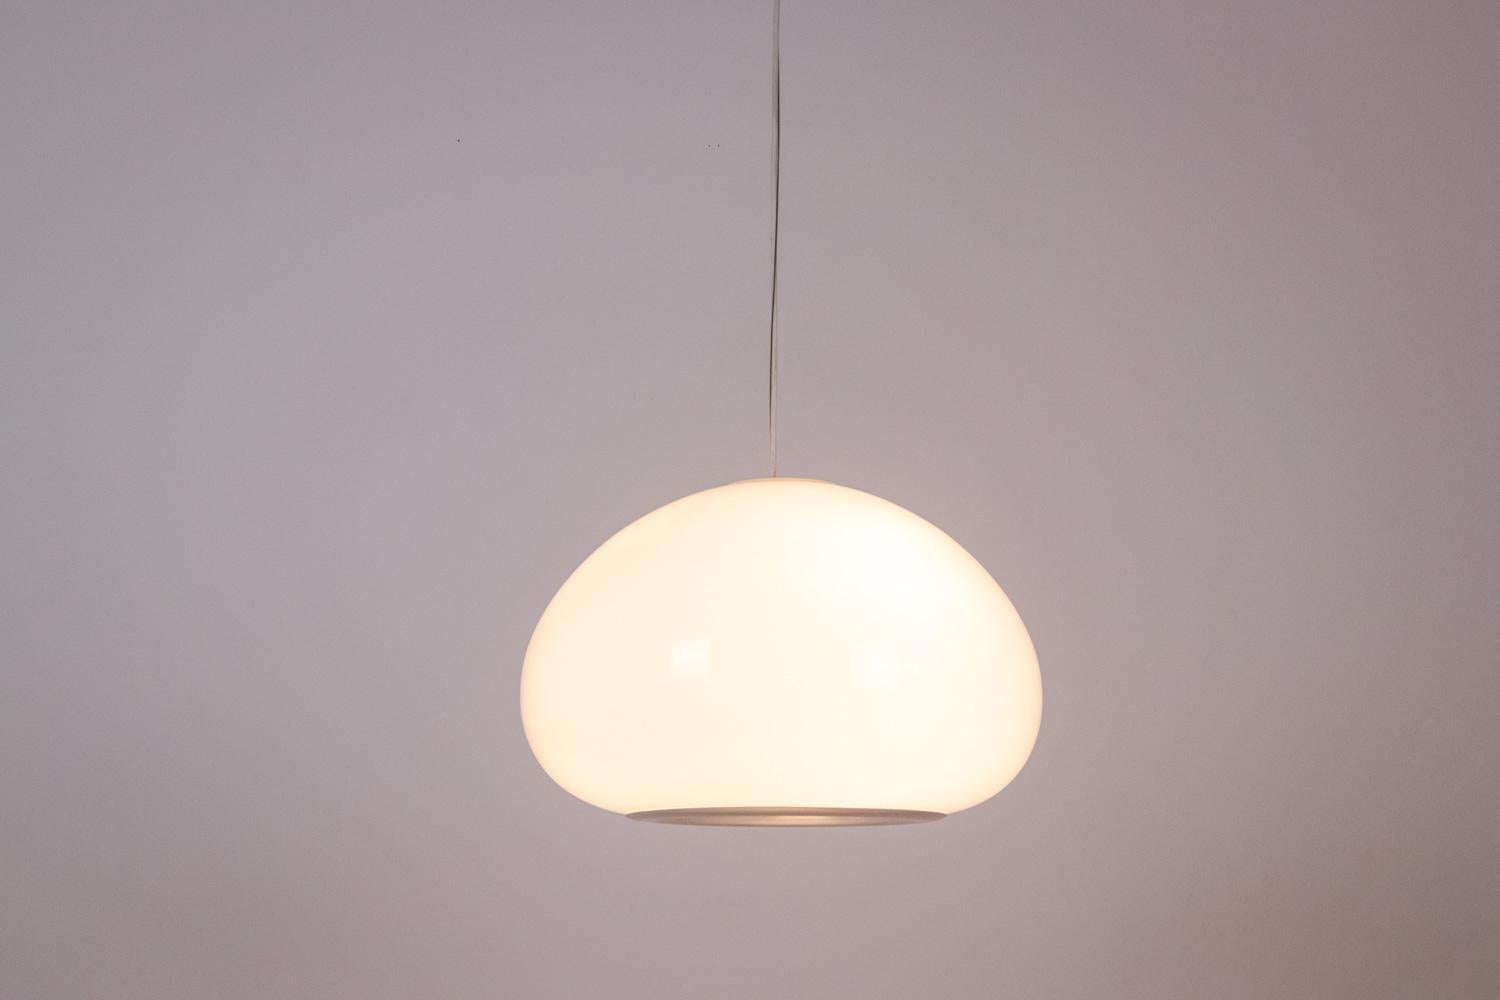 Achille & Pier Castiglioni, by.
Flos, edited by.

Pair of pendant lights. Each pendant light is made up of a white opaline with concentric circles in chrome metal in its center, circular in shape, the opaline being held by a stem and a white cup,